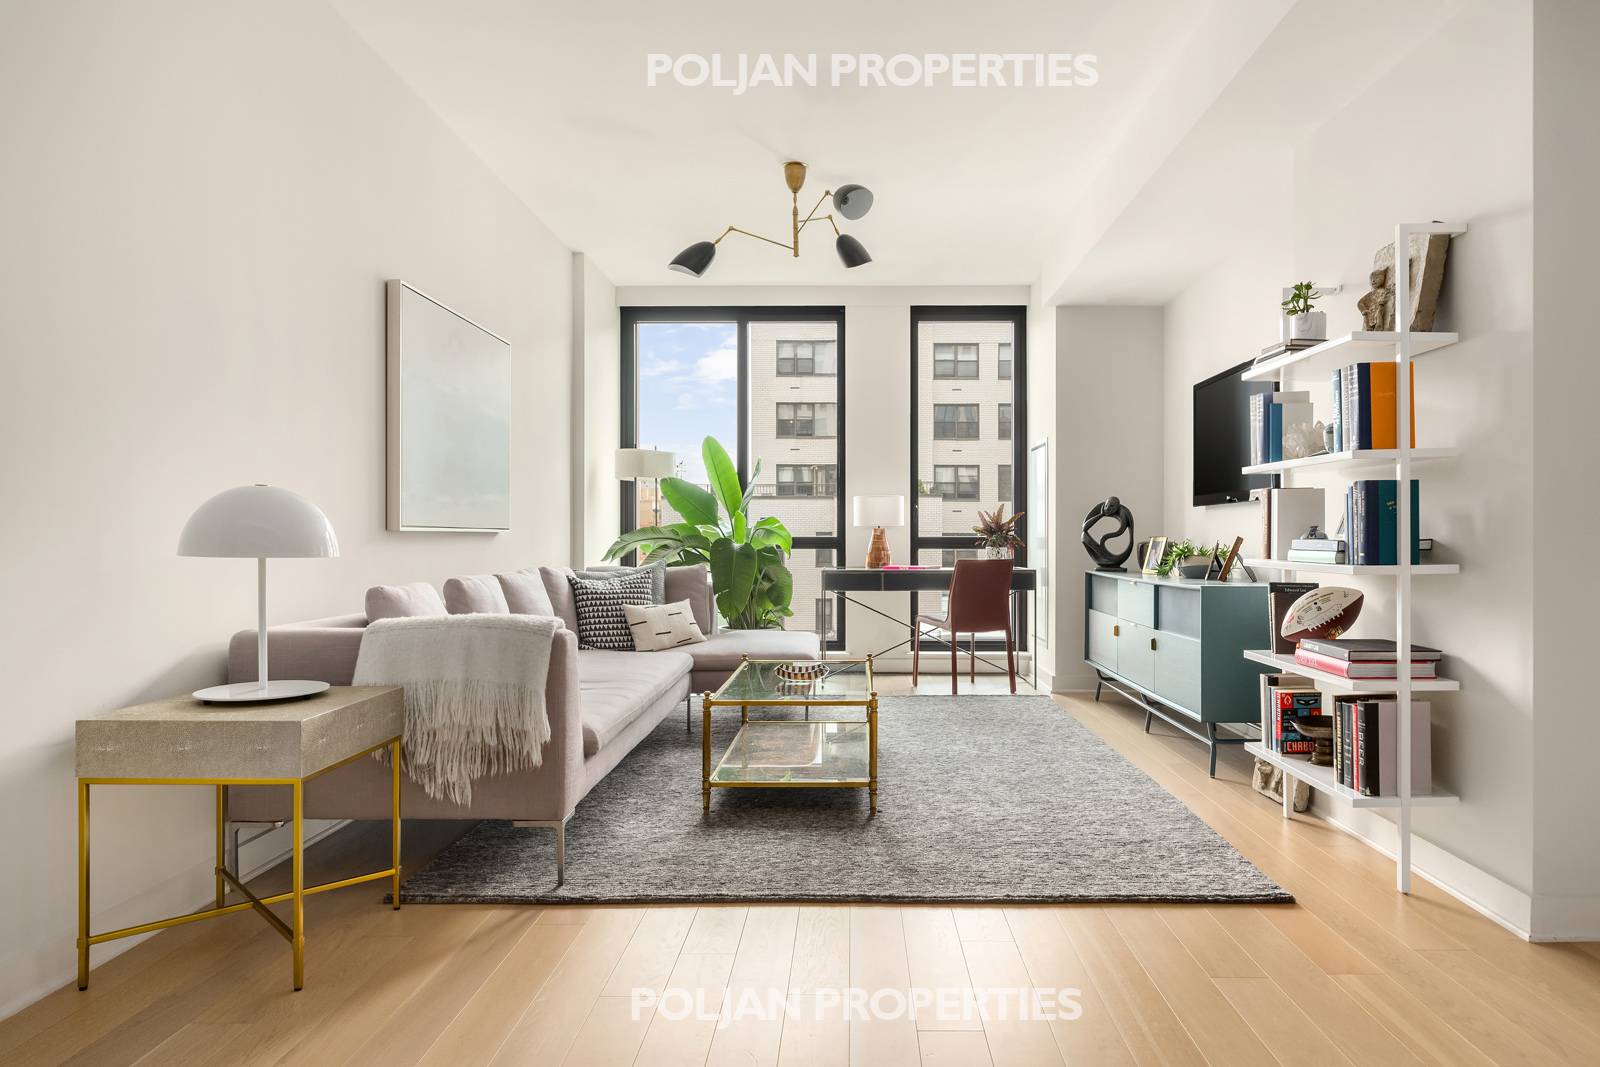 Flawless living in the heart of gorgeous Gramercy Park.